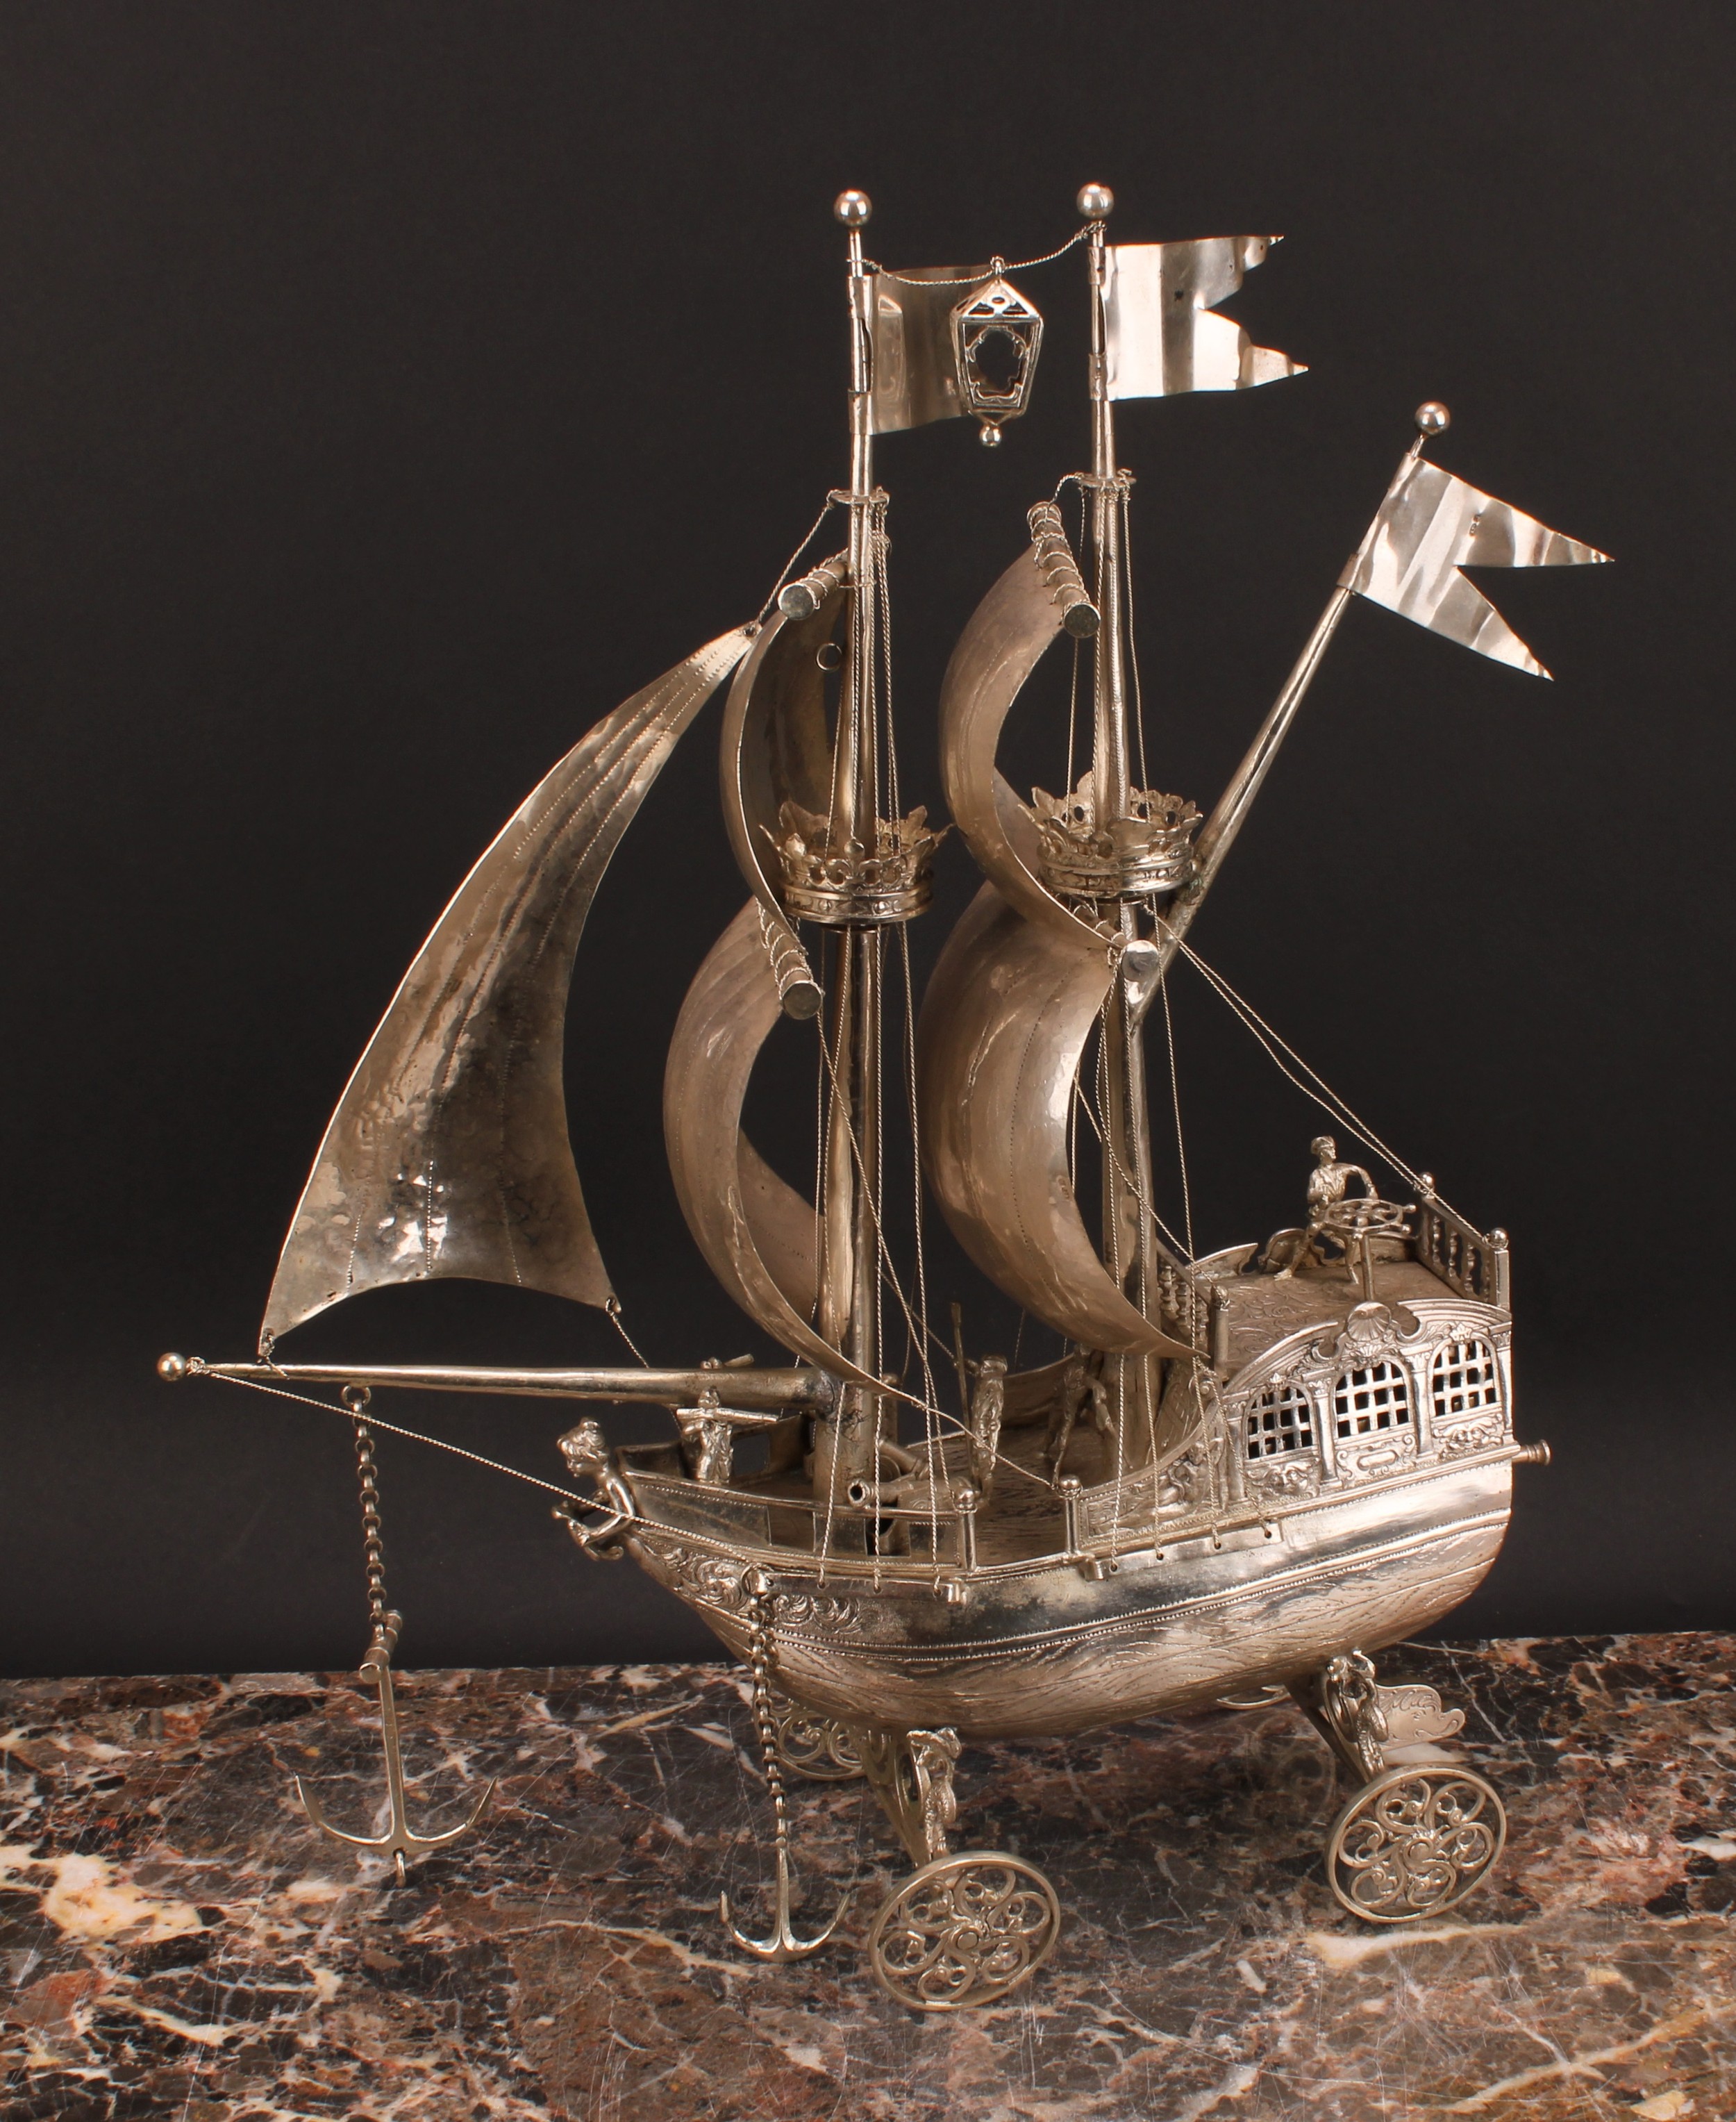 A Dutch silver nef, typically cast and wrought as a two-masted sailing ship, with billowing sails - Image 2 of 5